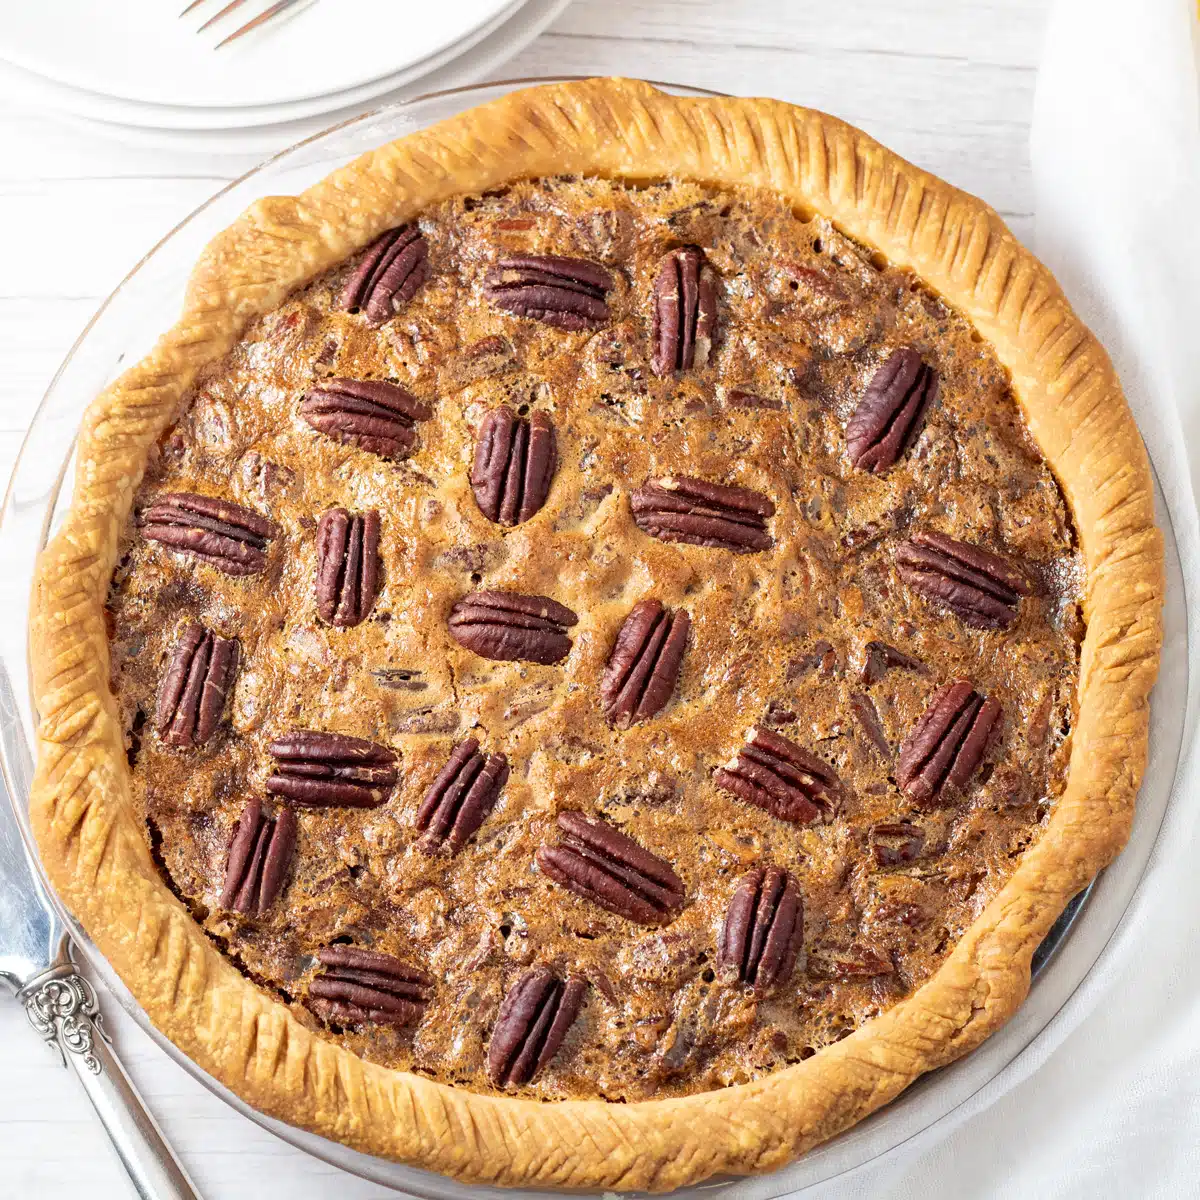 Square image of pecan pie on a white background.